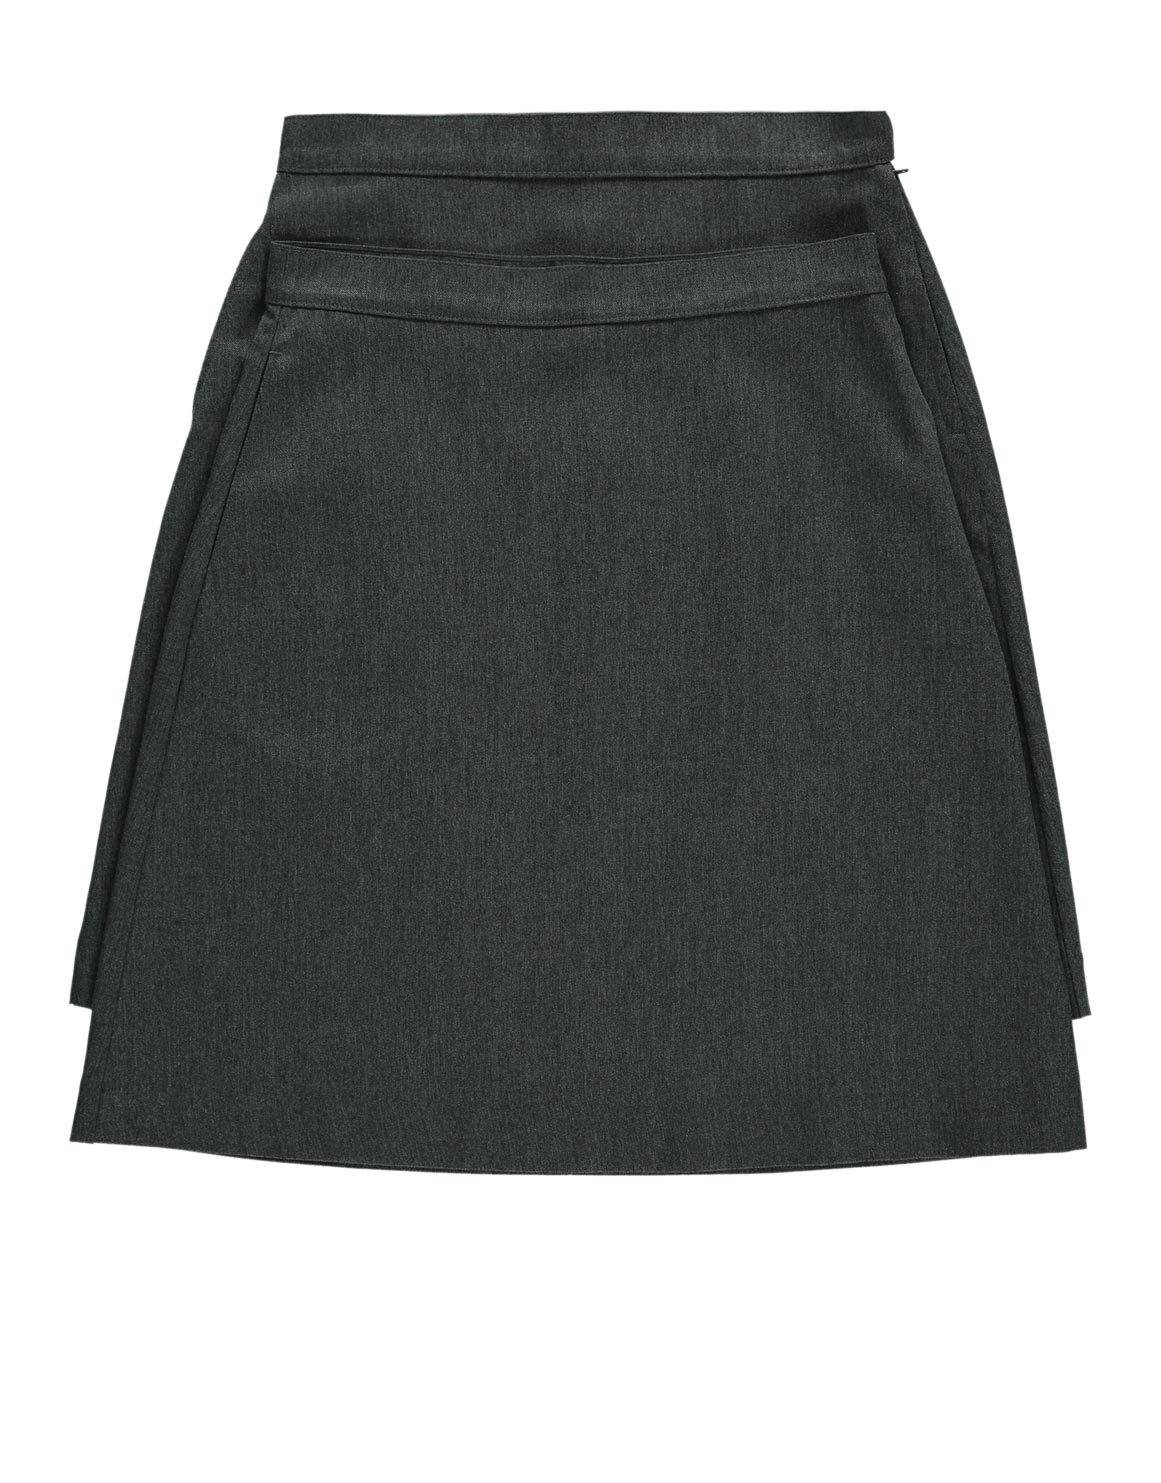 Easy Care A-Line School Skirts 2 Pack | Woolworths.co.za